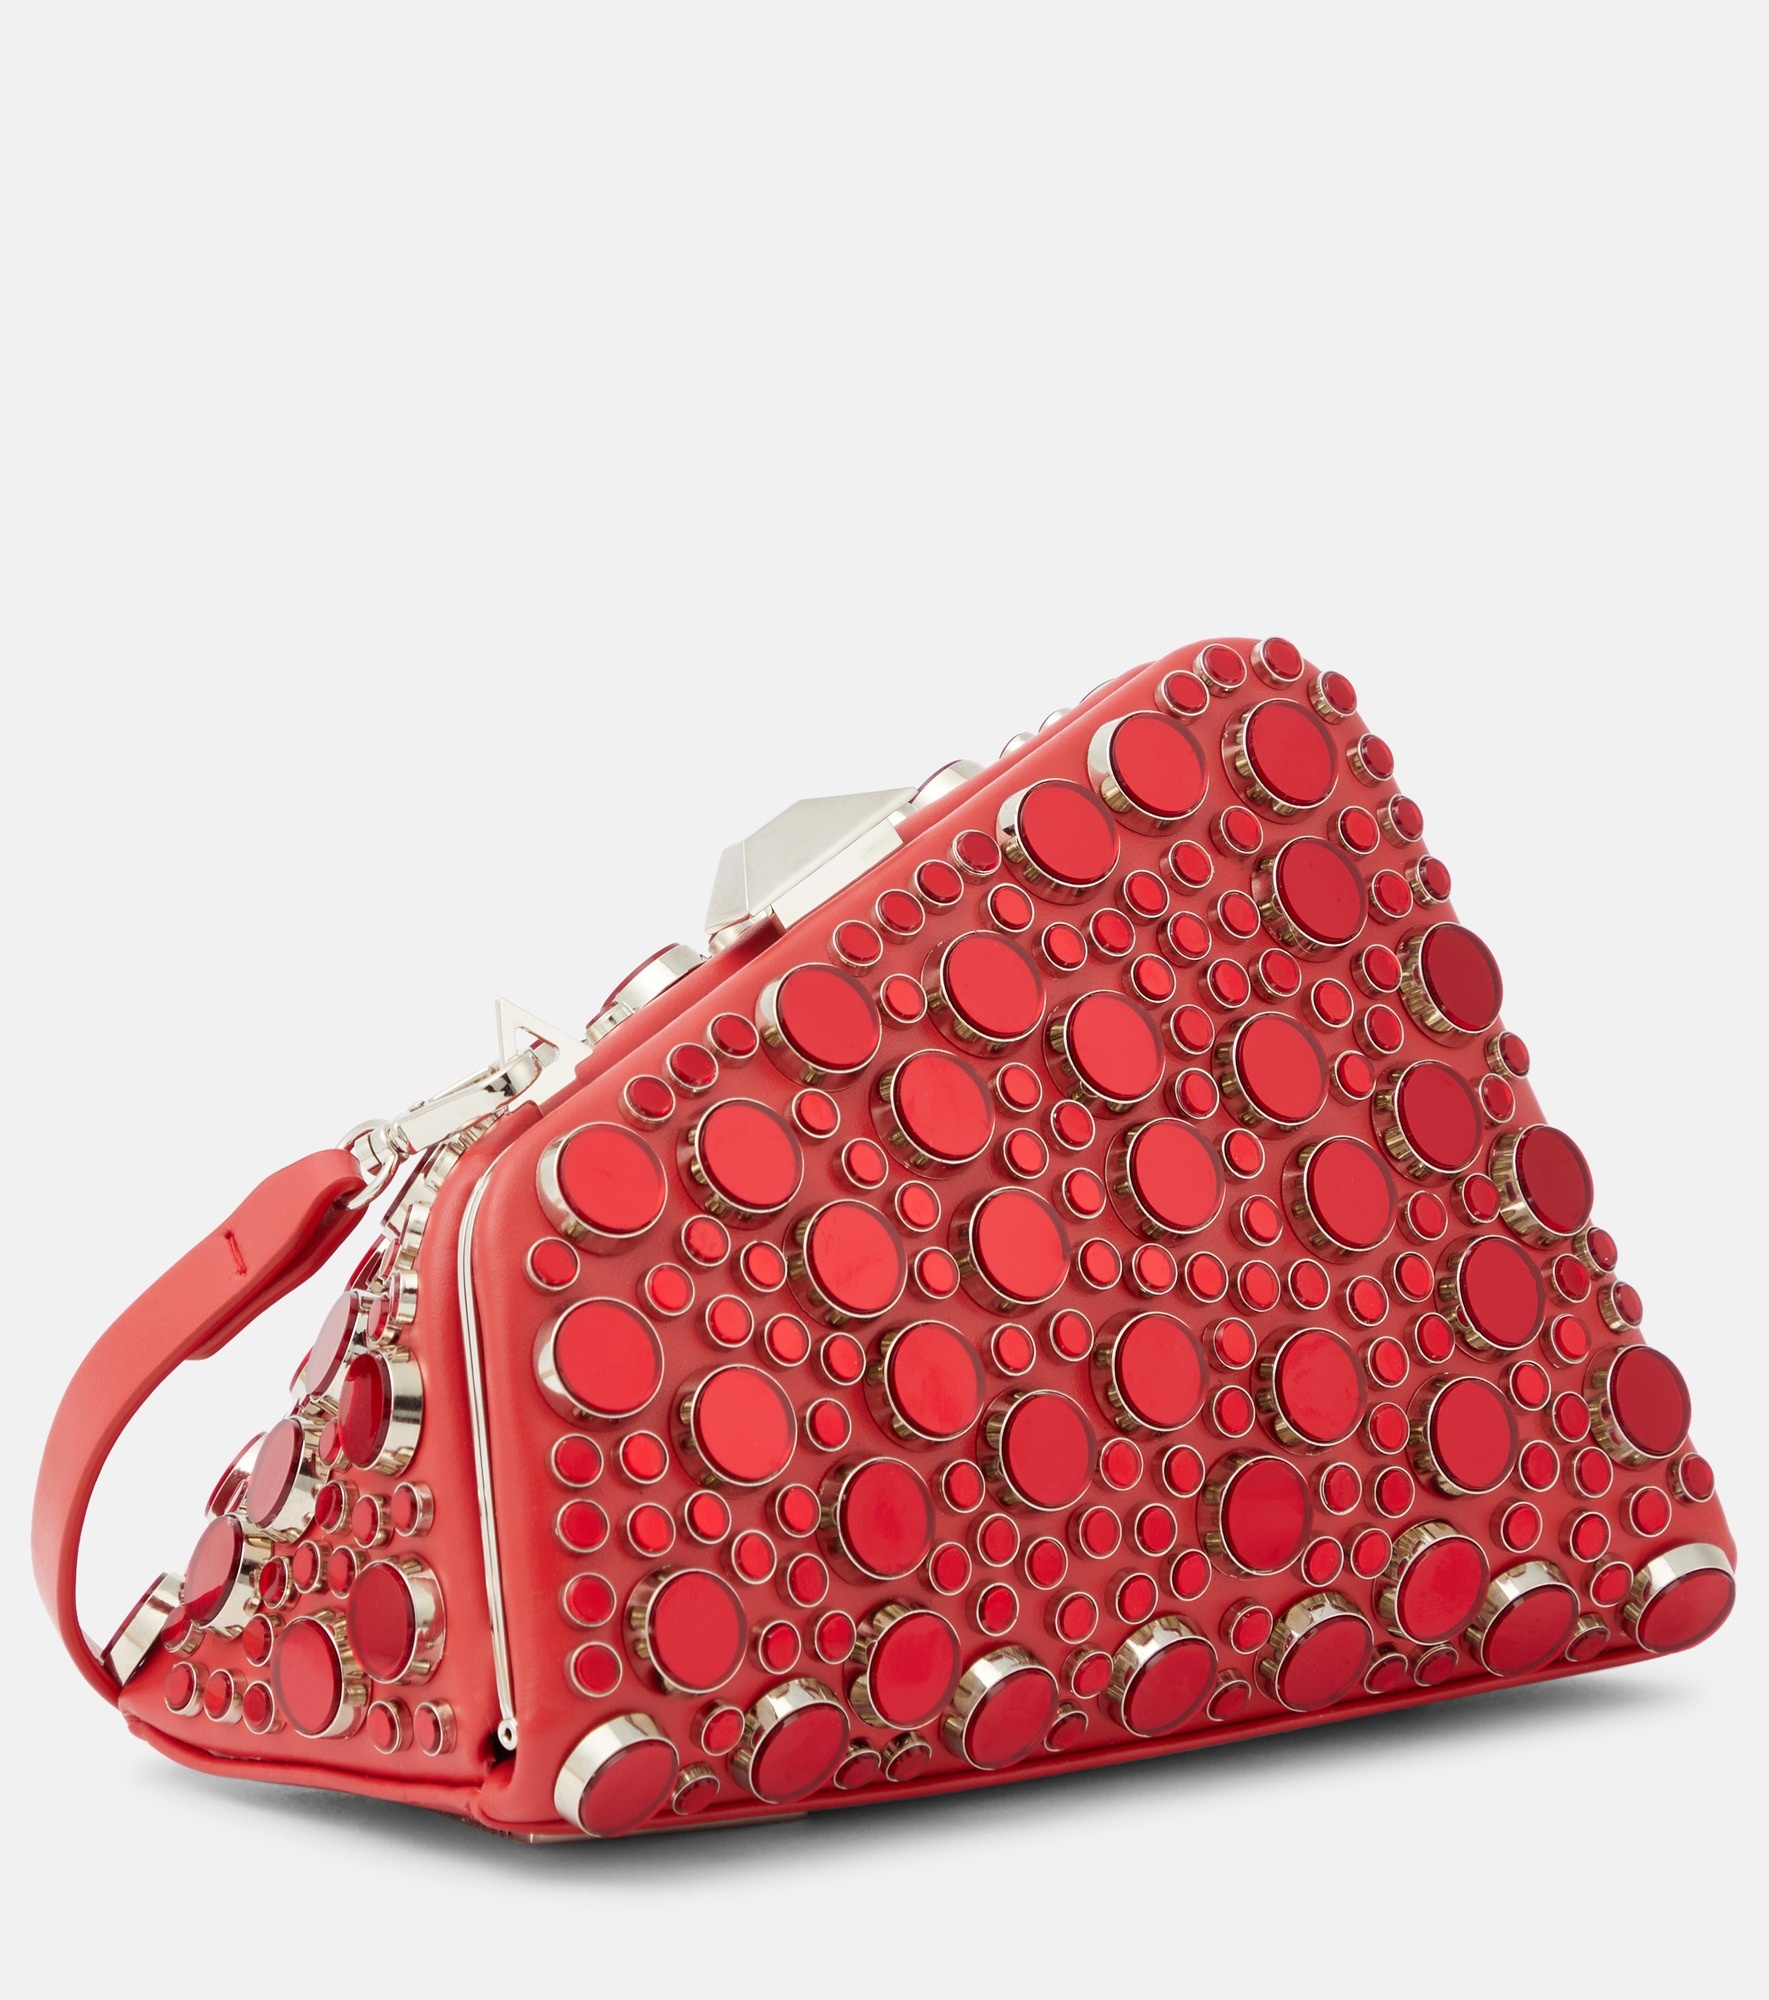 Midnight Mini embellished leather clutch - 4